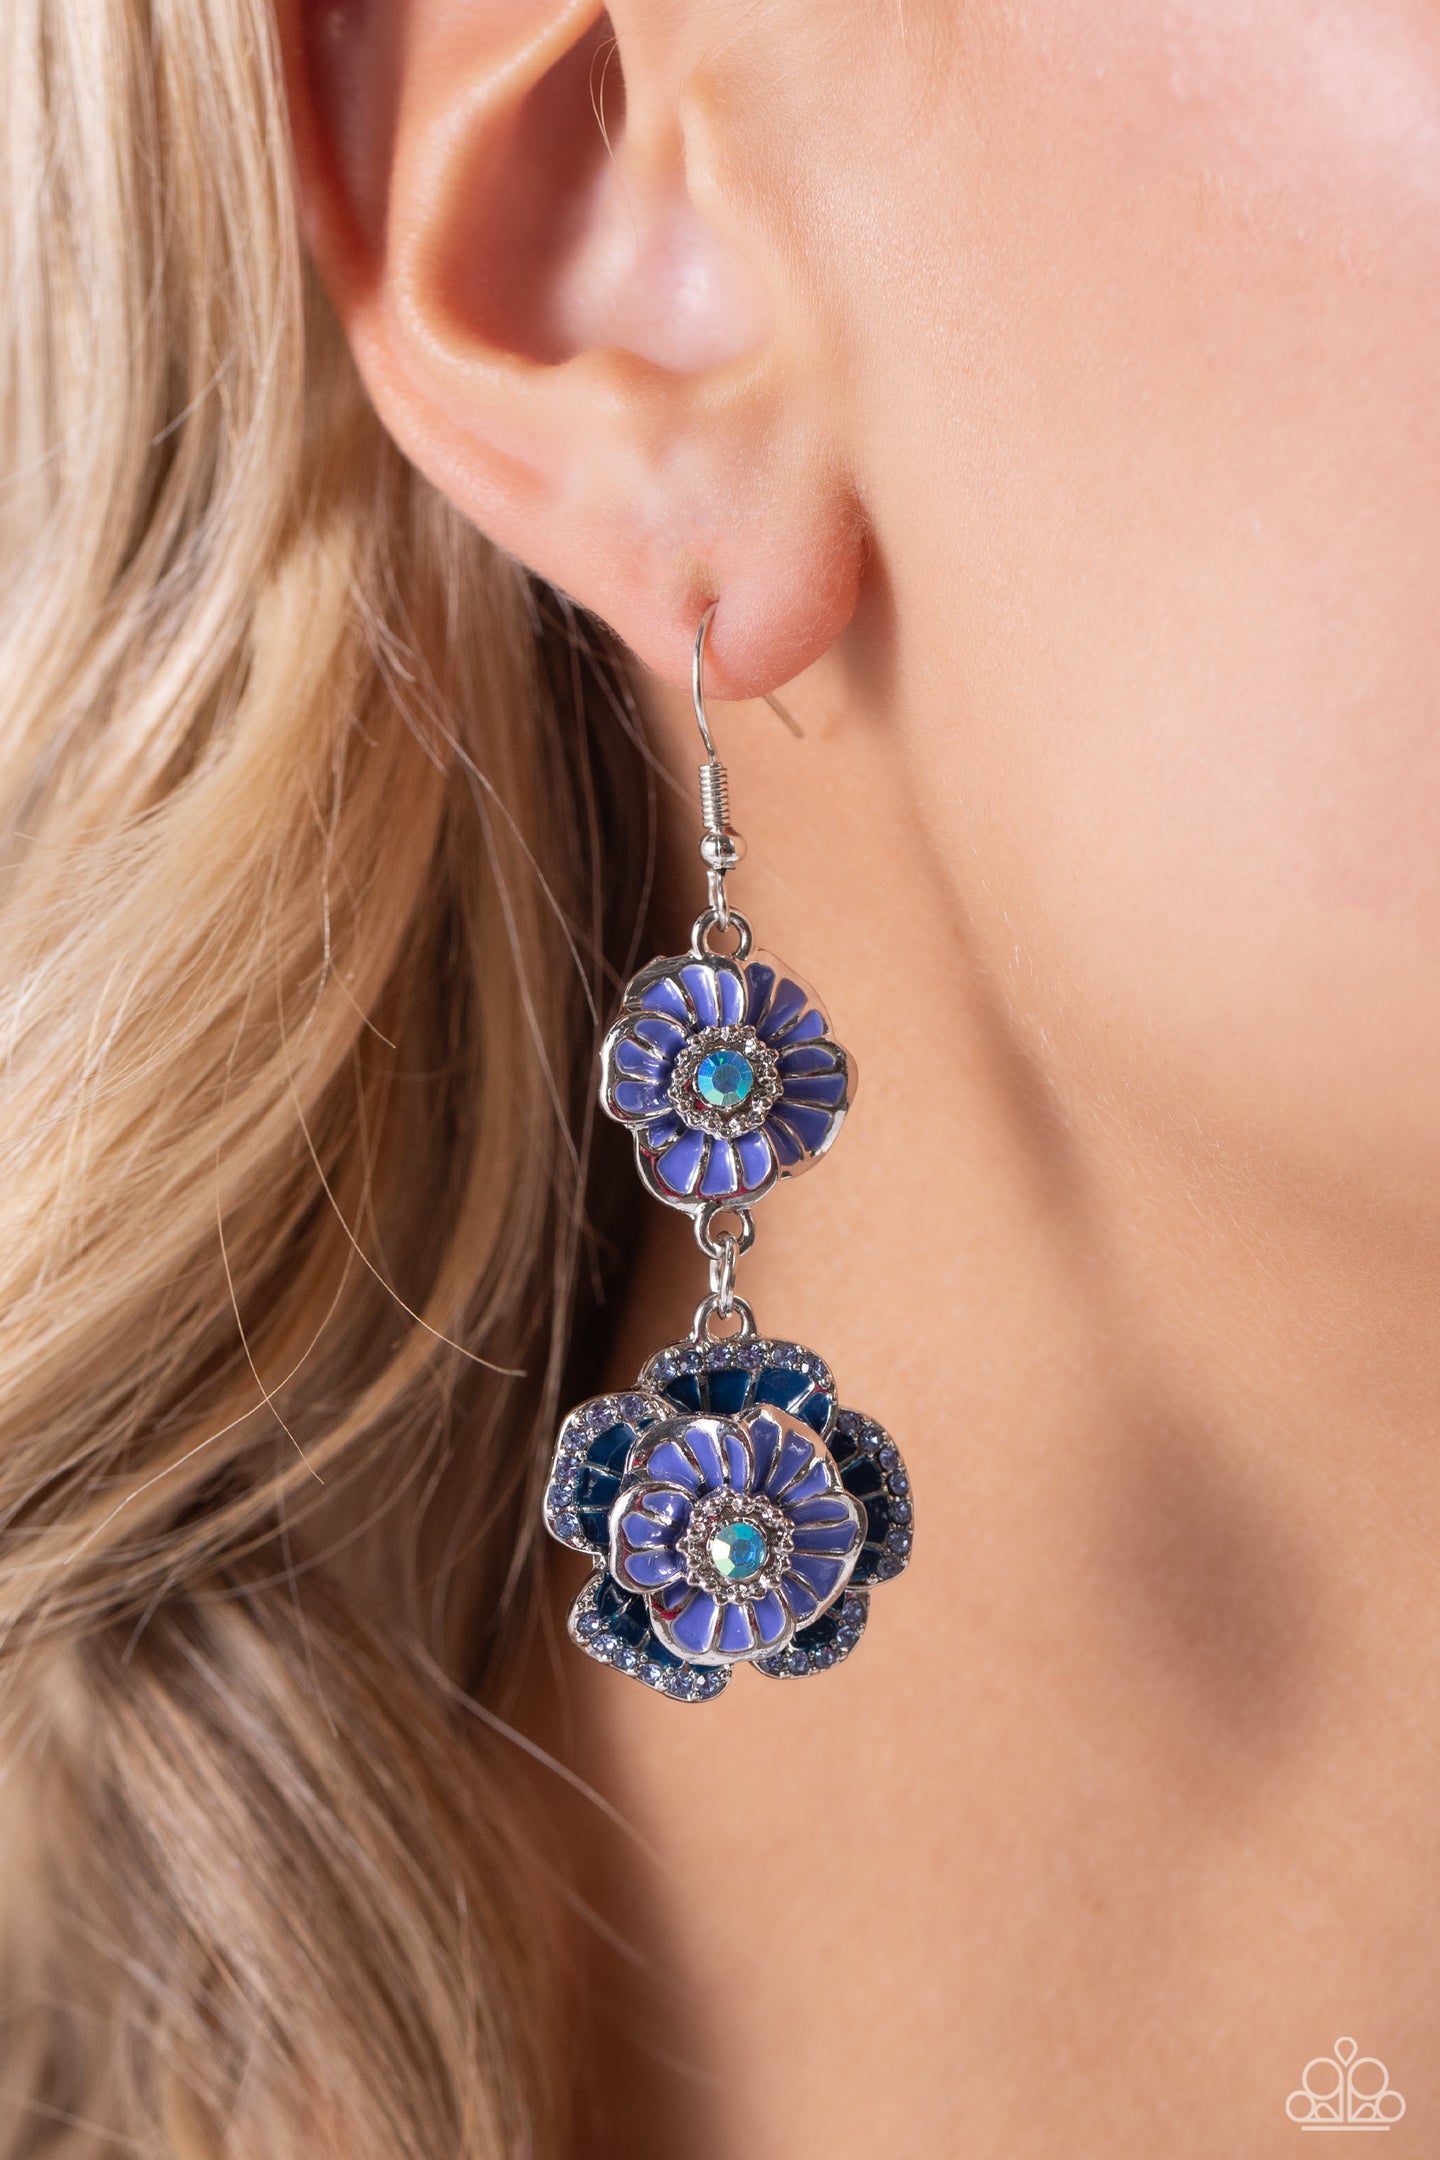 Intricate Impression - Blue earrings